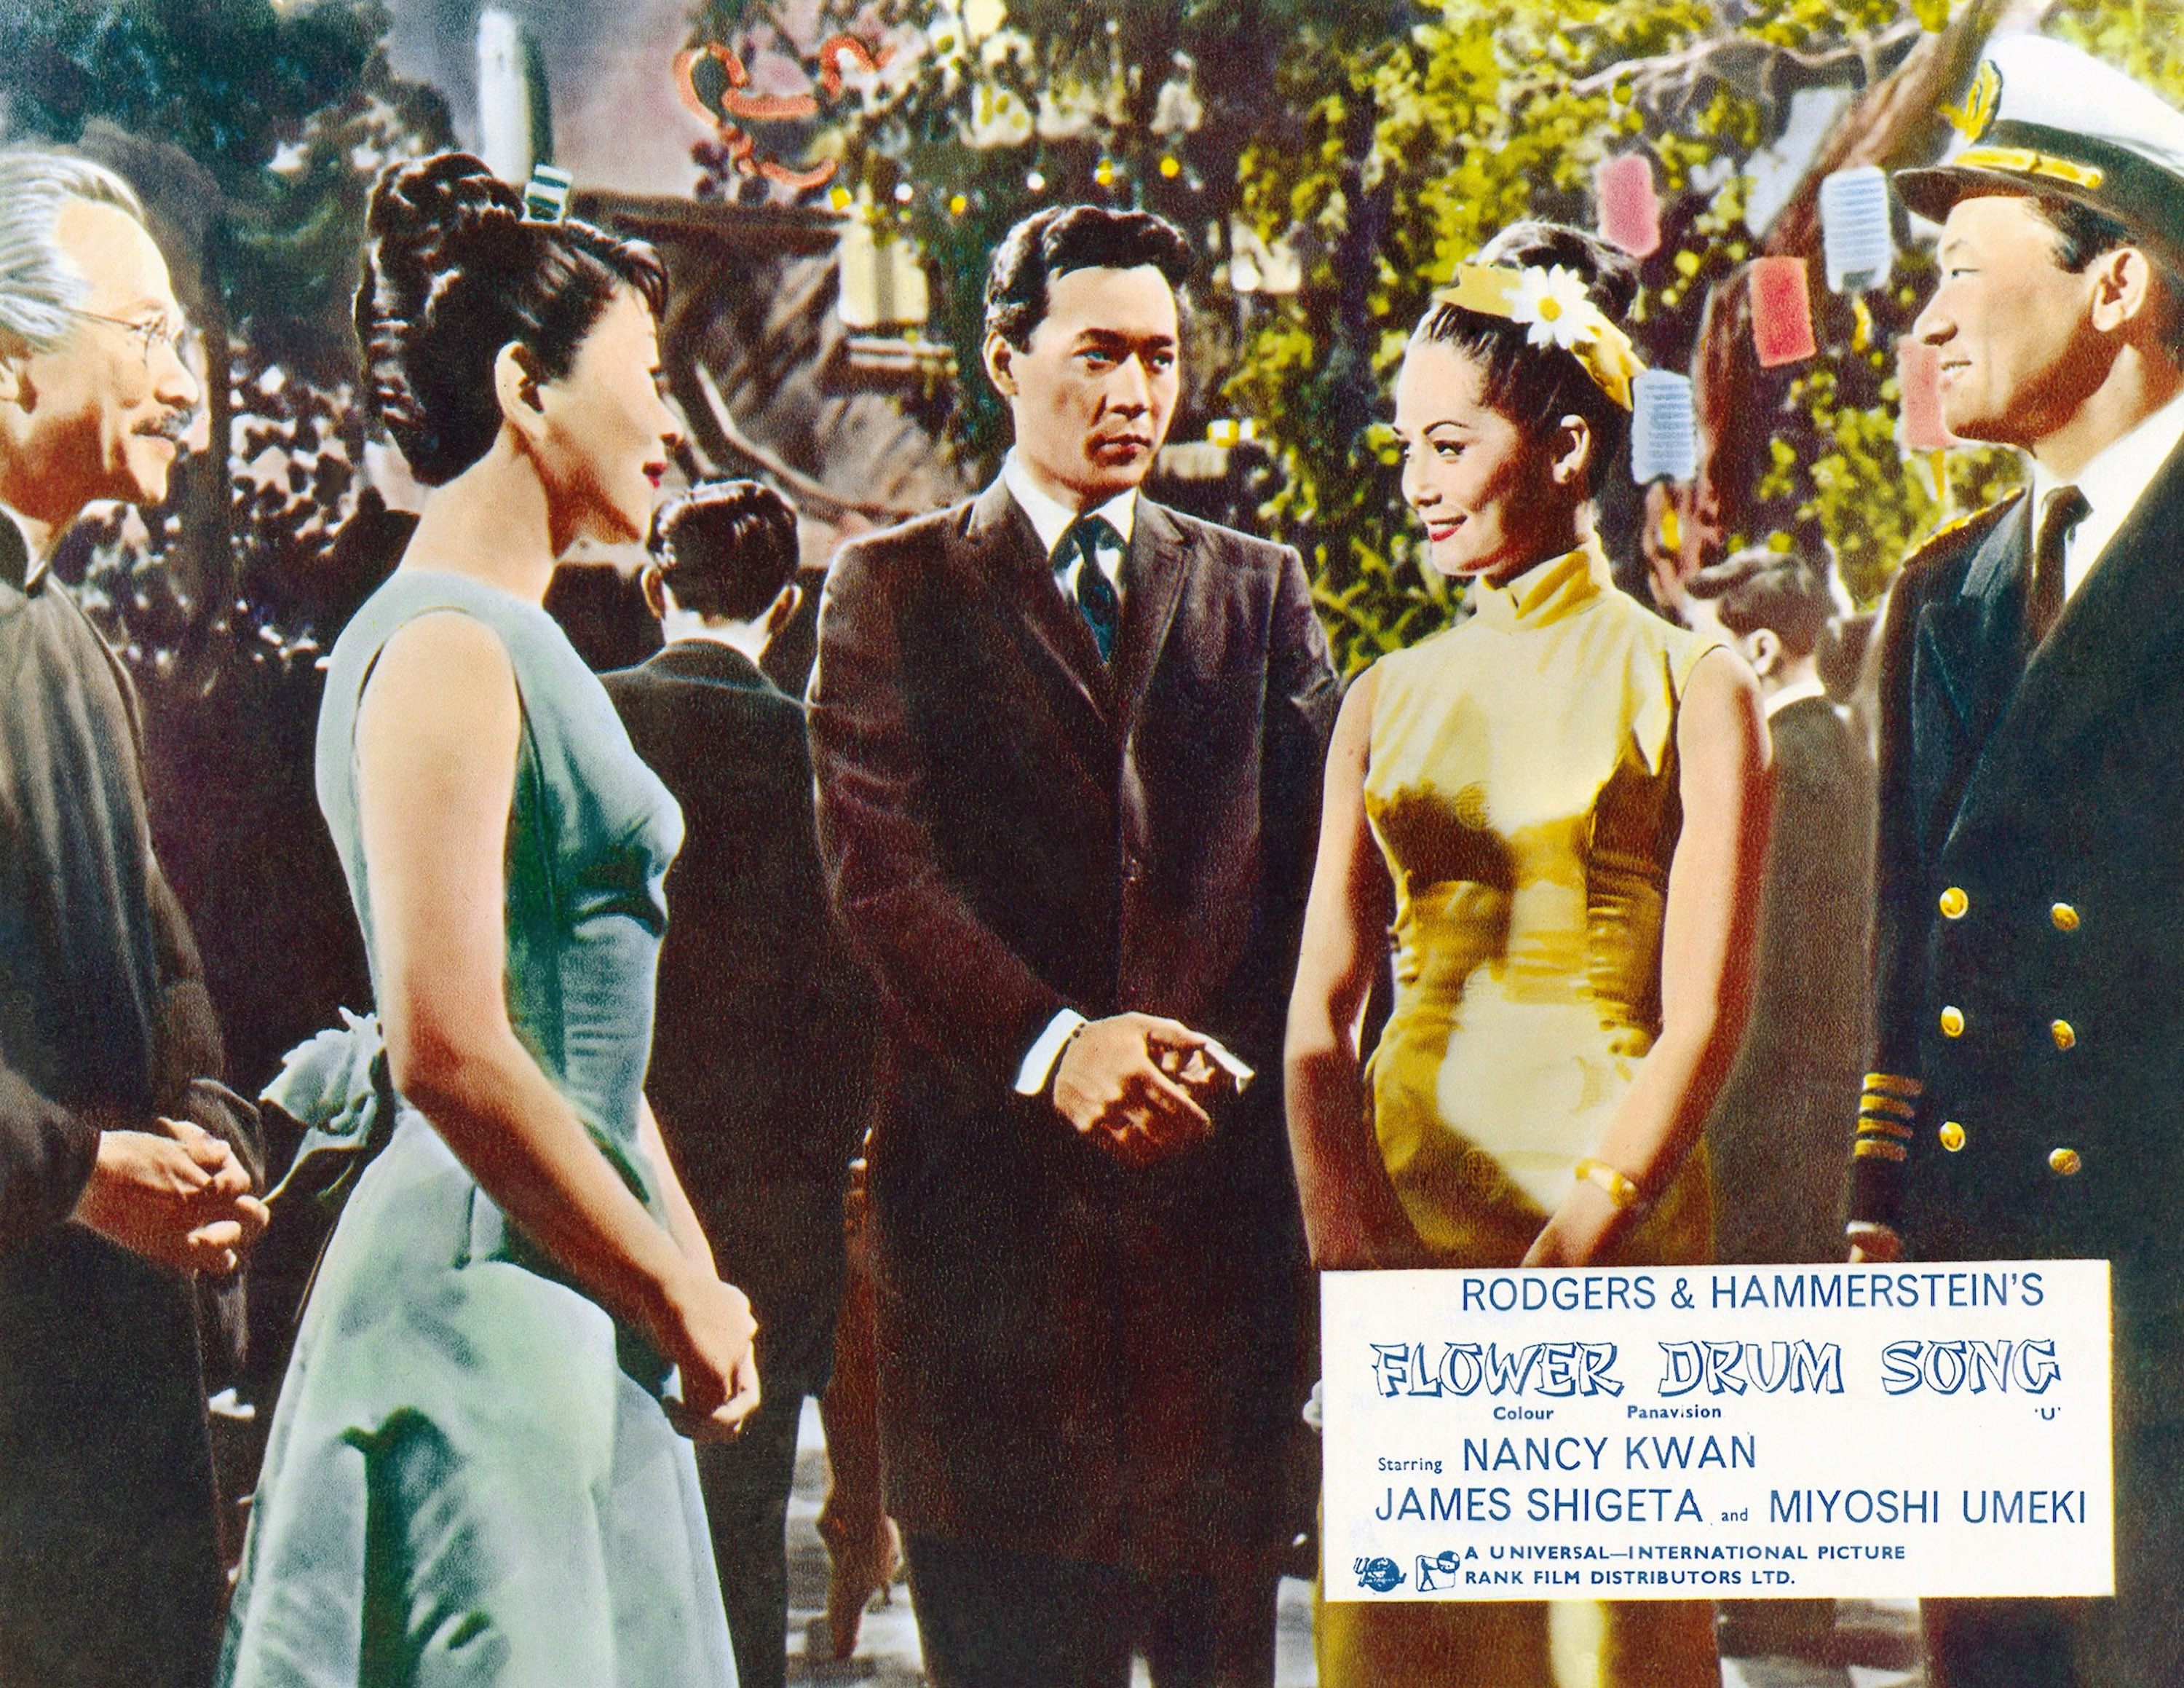 Flower Drum Song was the first Hollywood film with a mostly Asian cast. From left: Kam Tong, Miyoshi Umeki, James Shigeta, Nancy Kwan and Victor Sen Yung in a lobby card for Flower Drum Song. Photo: Getty Images